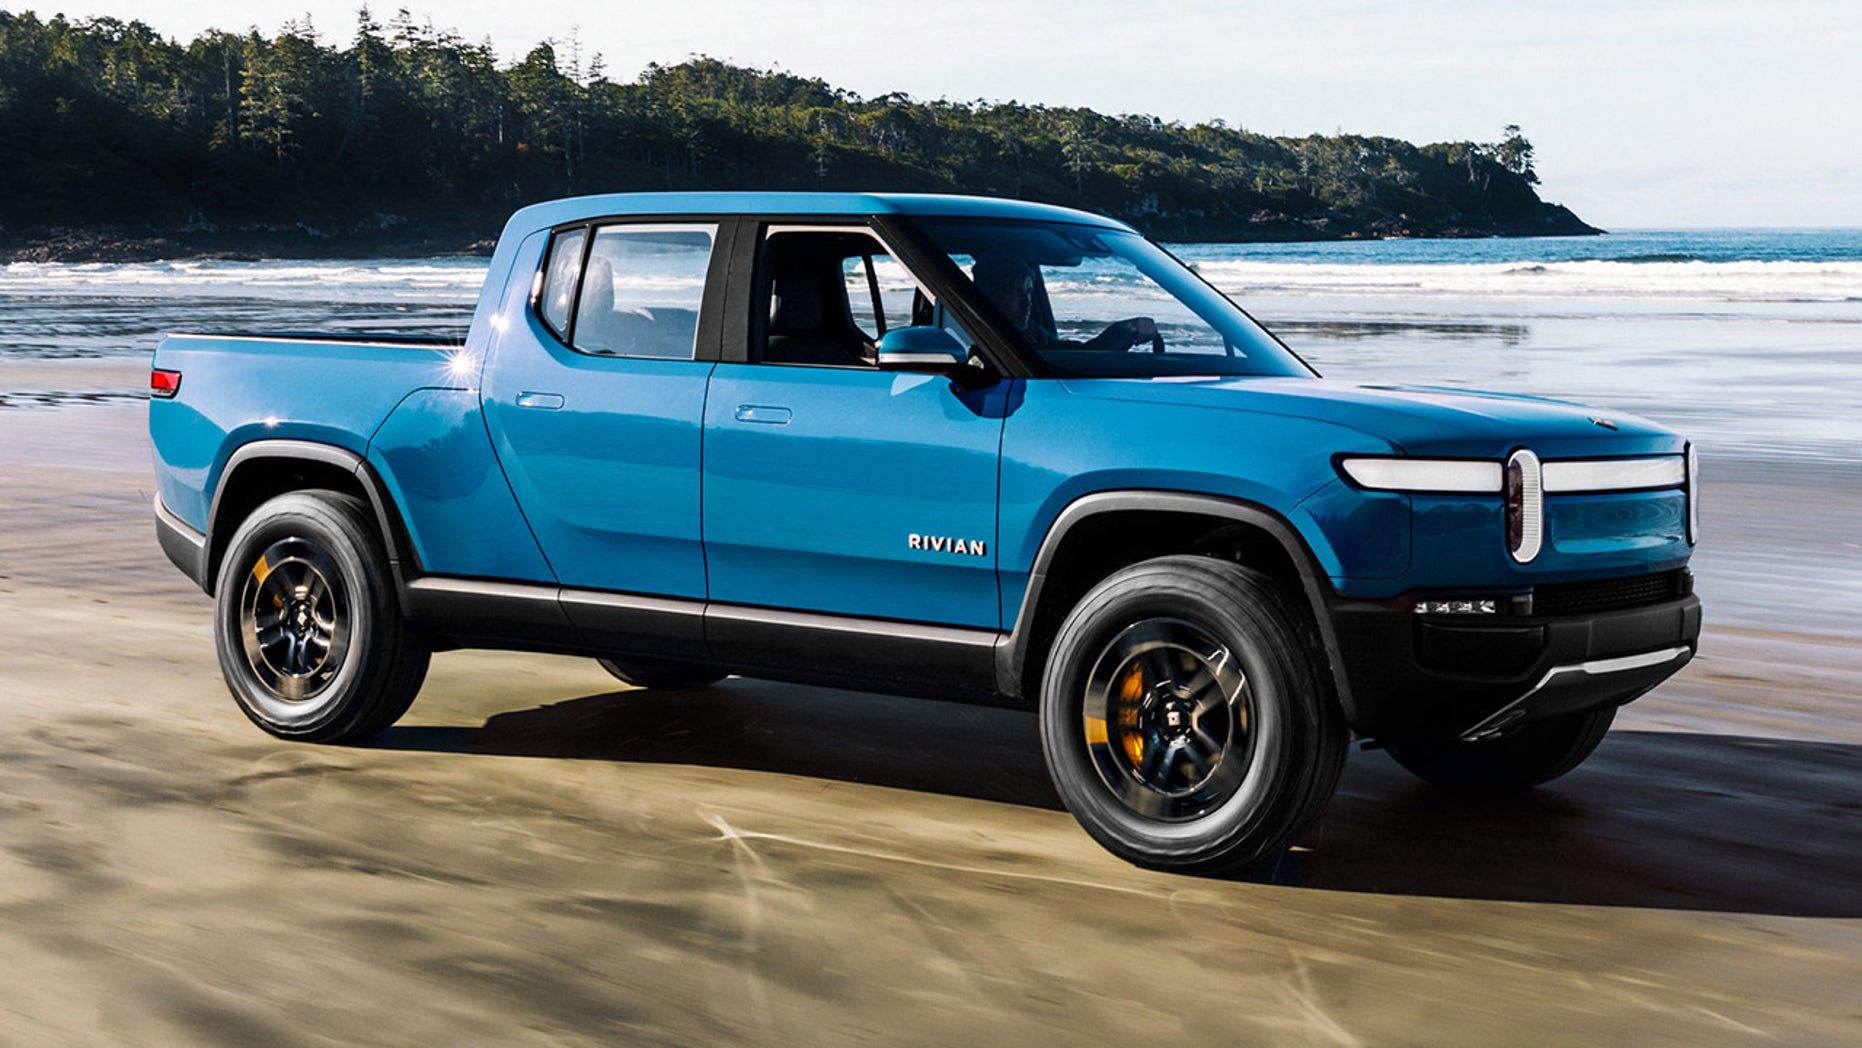 Rivian sued for gender discrimination and retaliation by fired VP ahead